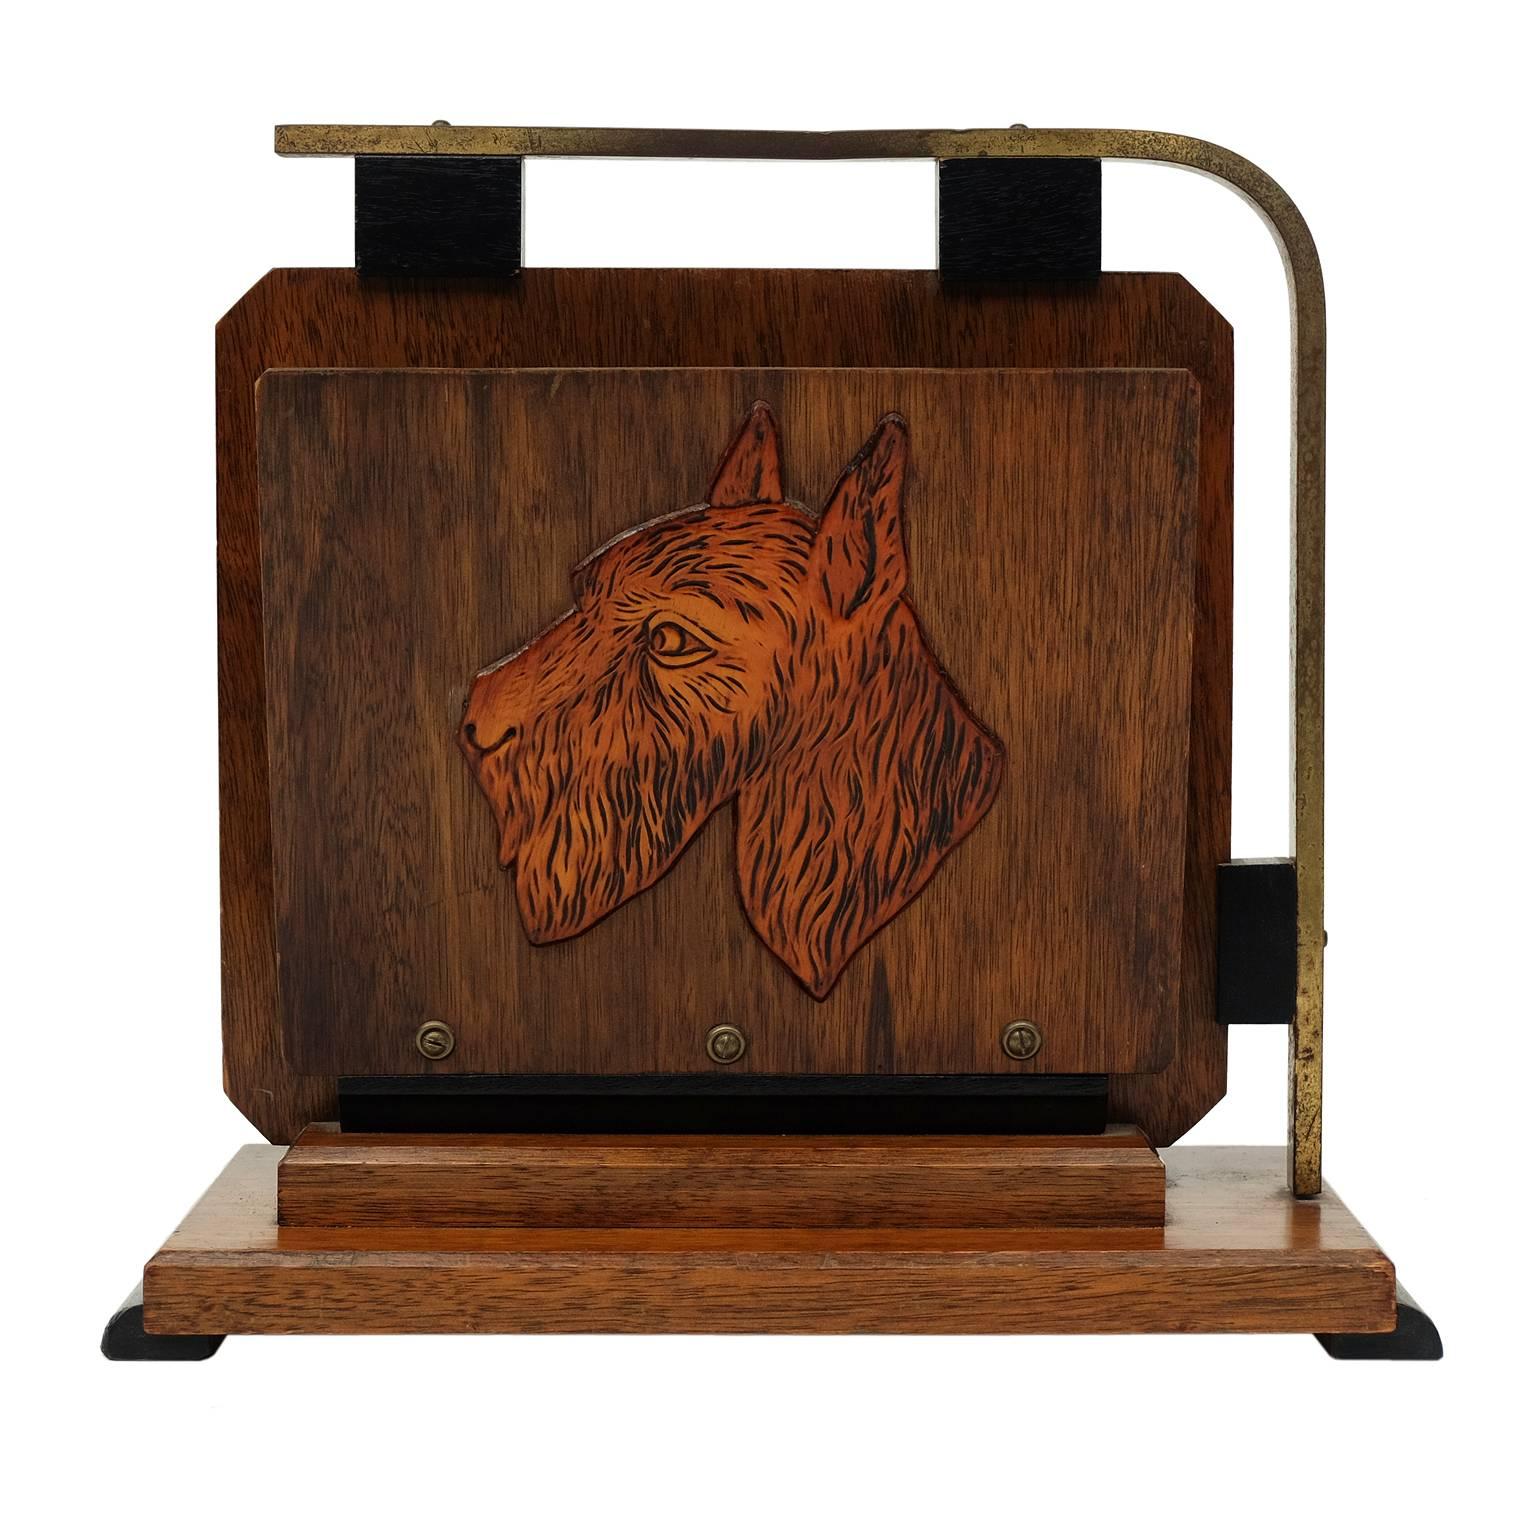 1940s magazine rack designed and manufactured in Belgium. 

Stained oak form with detailed wooden reliefs depicting two different terrier dogs.

Brass handle and ebonised feet.

H 33cm x W 34cm x D 15cm.